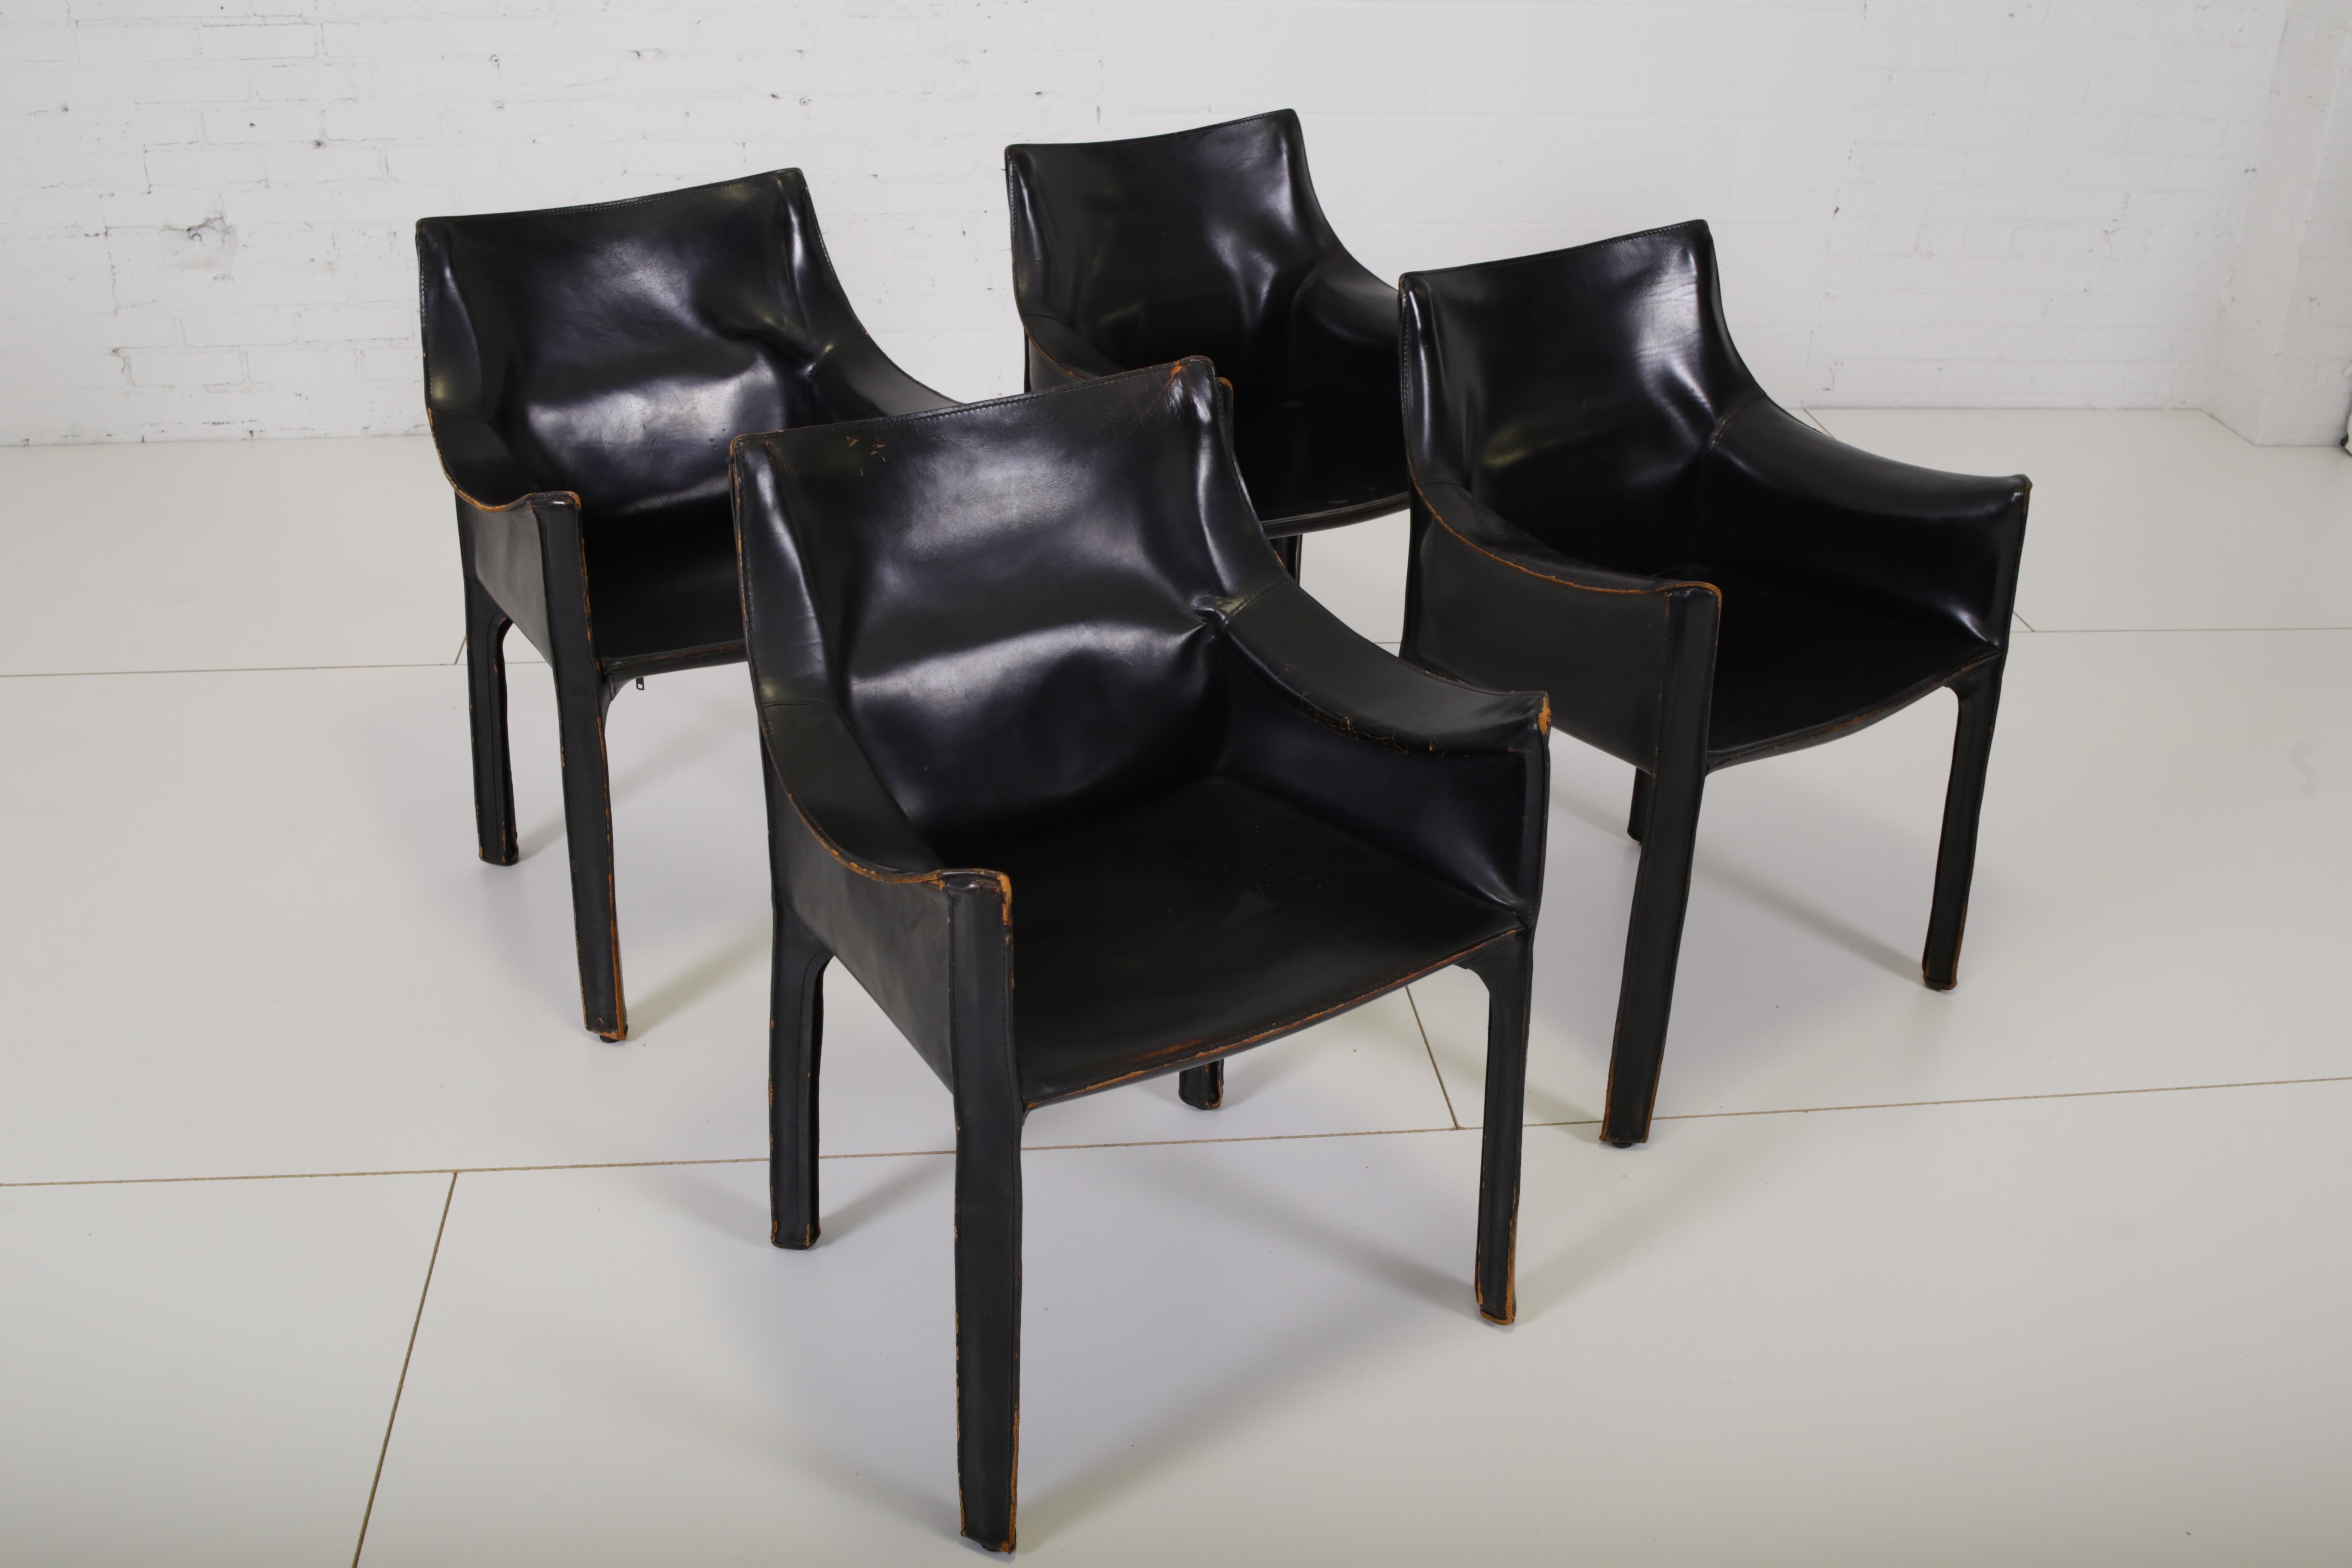 Set of 4 CAB chairs by Mario Bellini. Black leather arm chairs, circa 1970s, for Cassina.